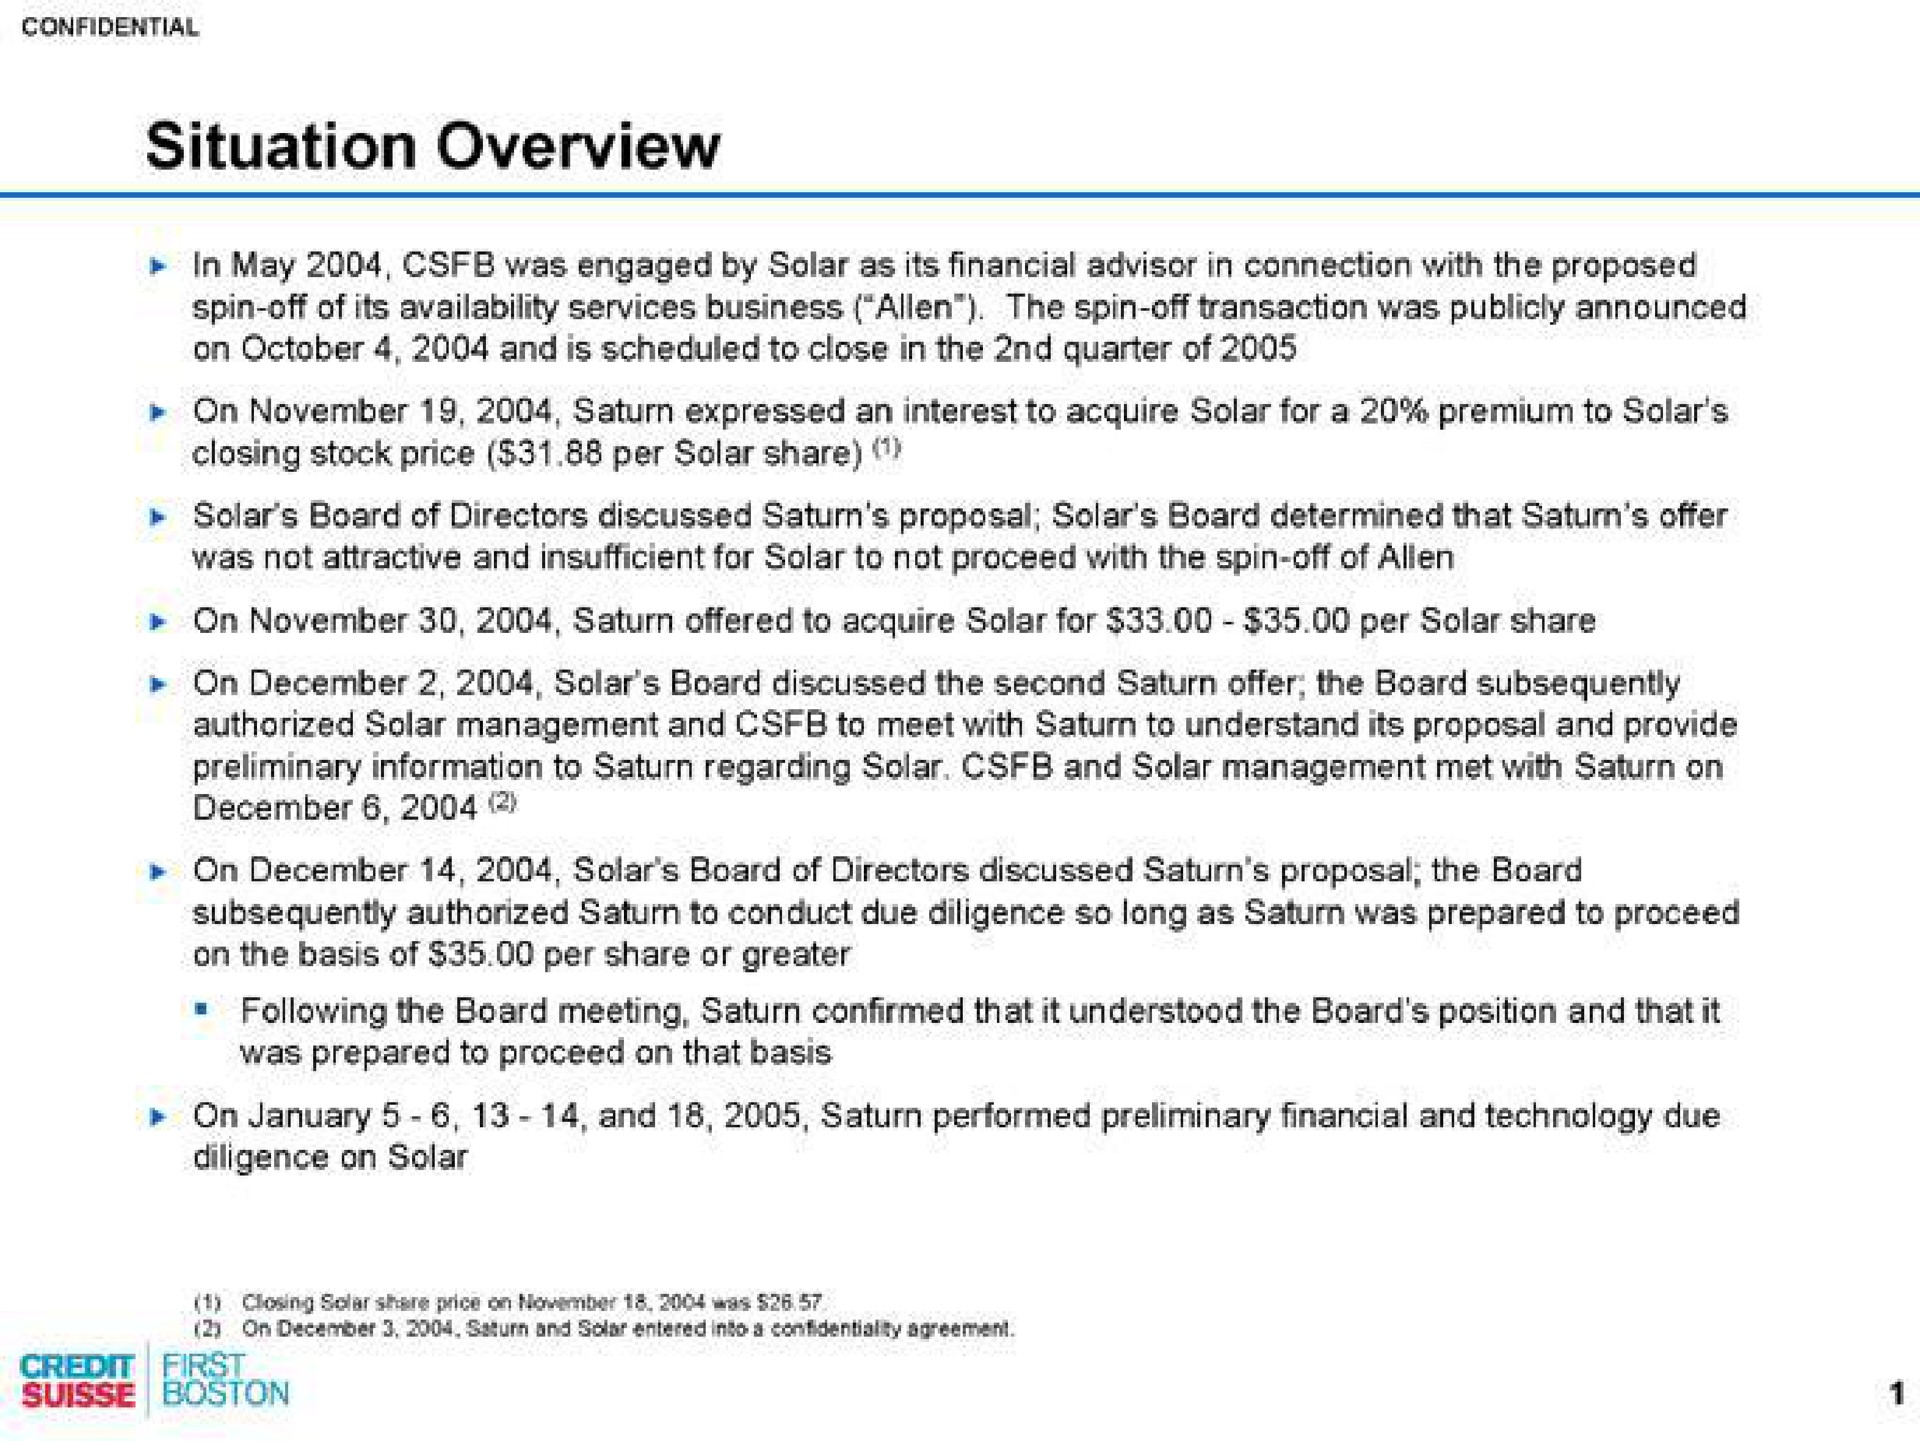 situation overview | Credit Suisse